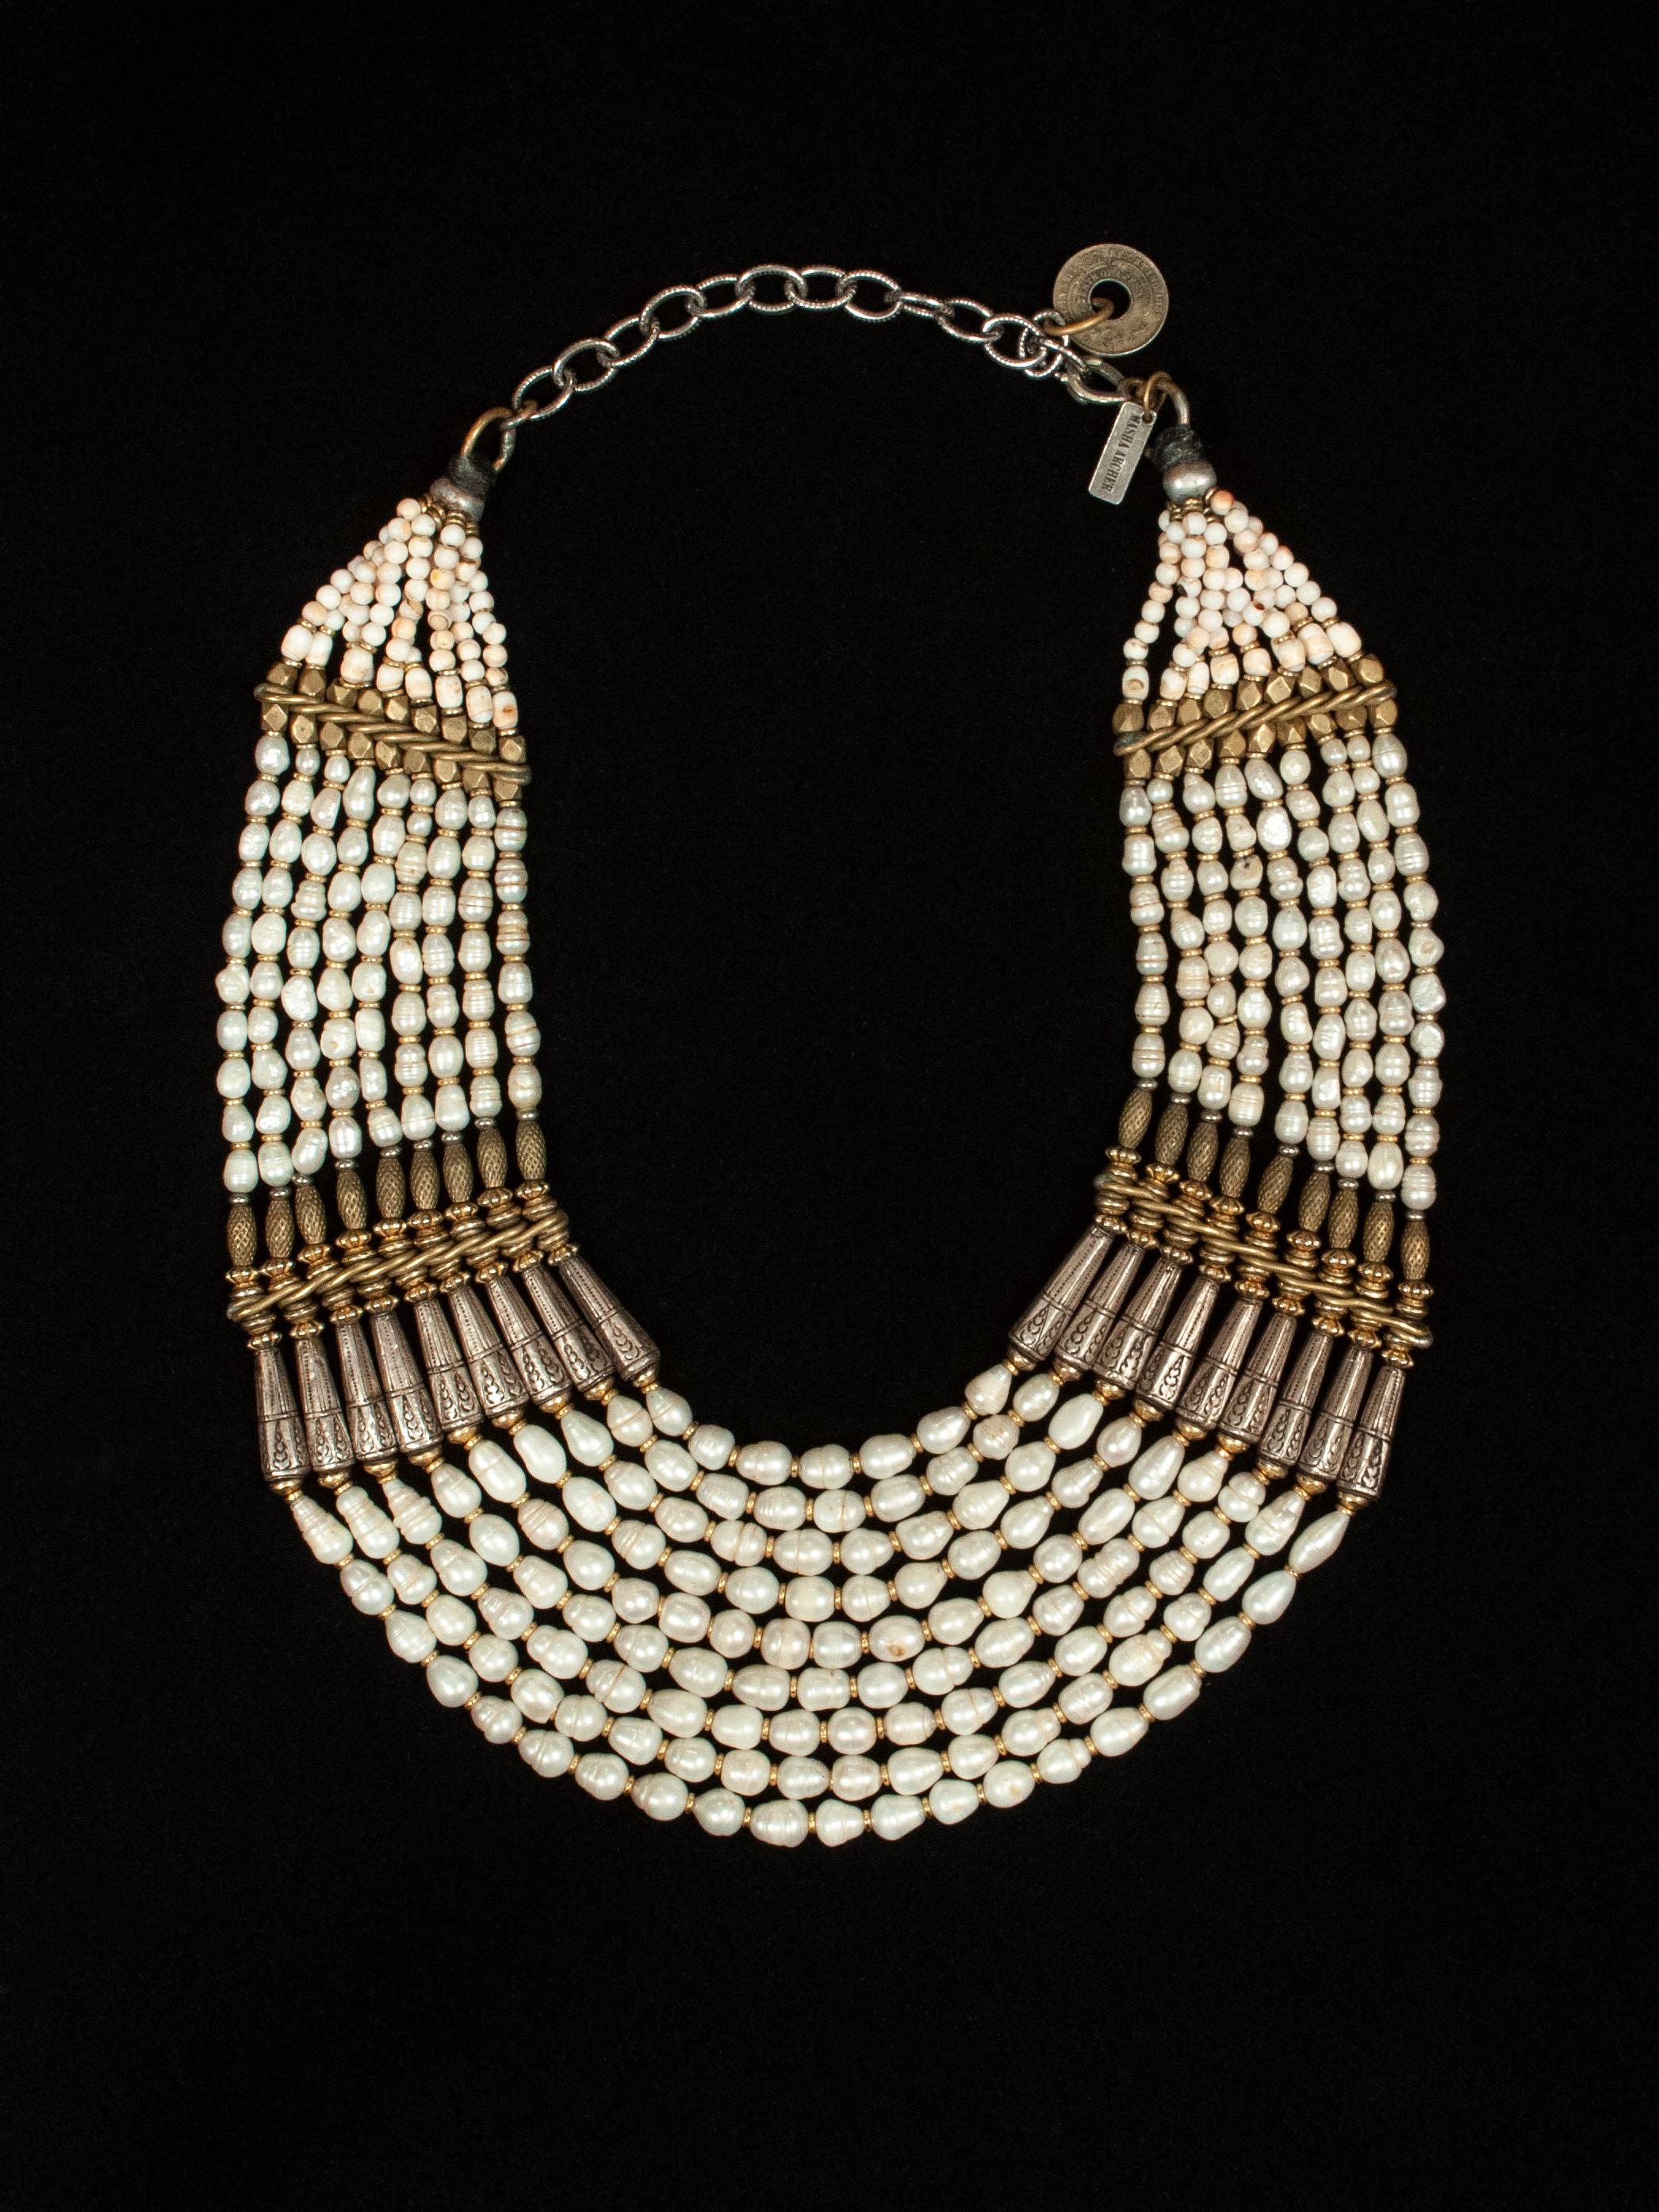 Masha Archer pearl bib necklace

A regal fresh water pearl necklace with brass and silver spacer beads from the famed San Francisco jewelry designer Masha Archer. The interior circumference measures from 16 - 20.5 inches, depending on where one